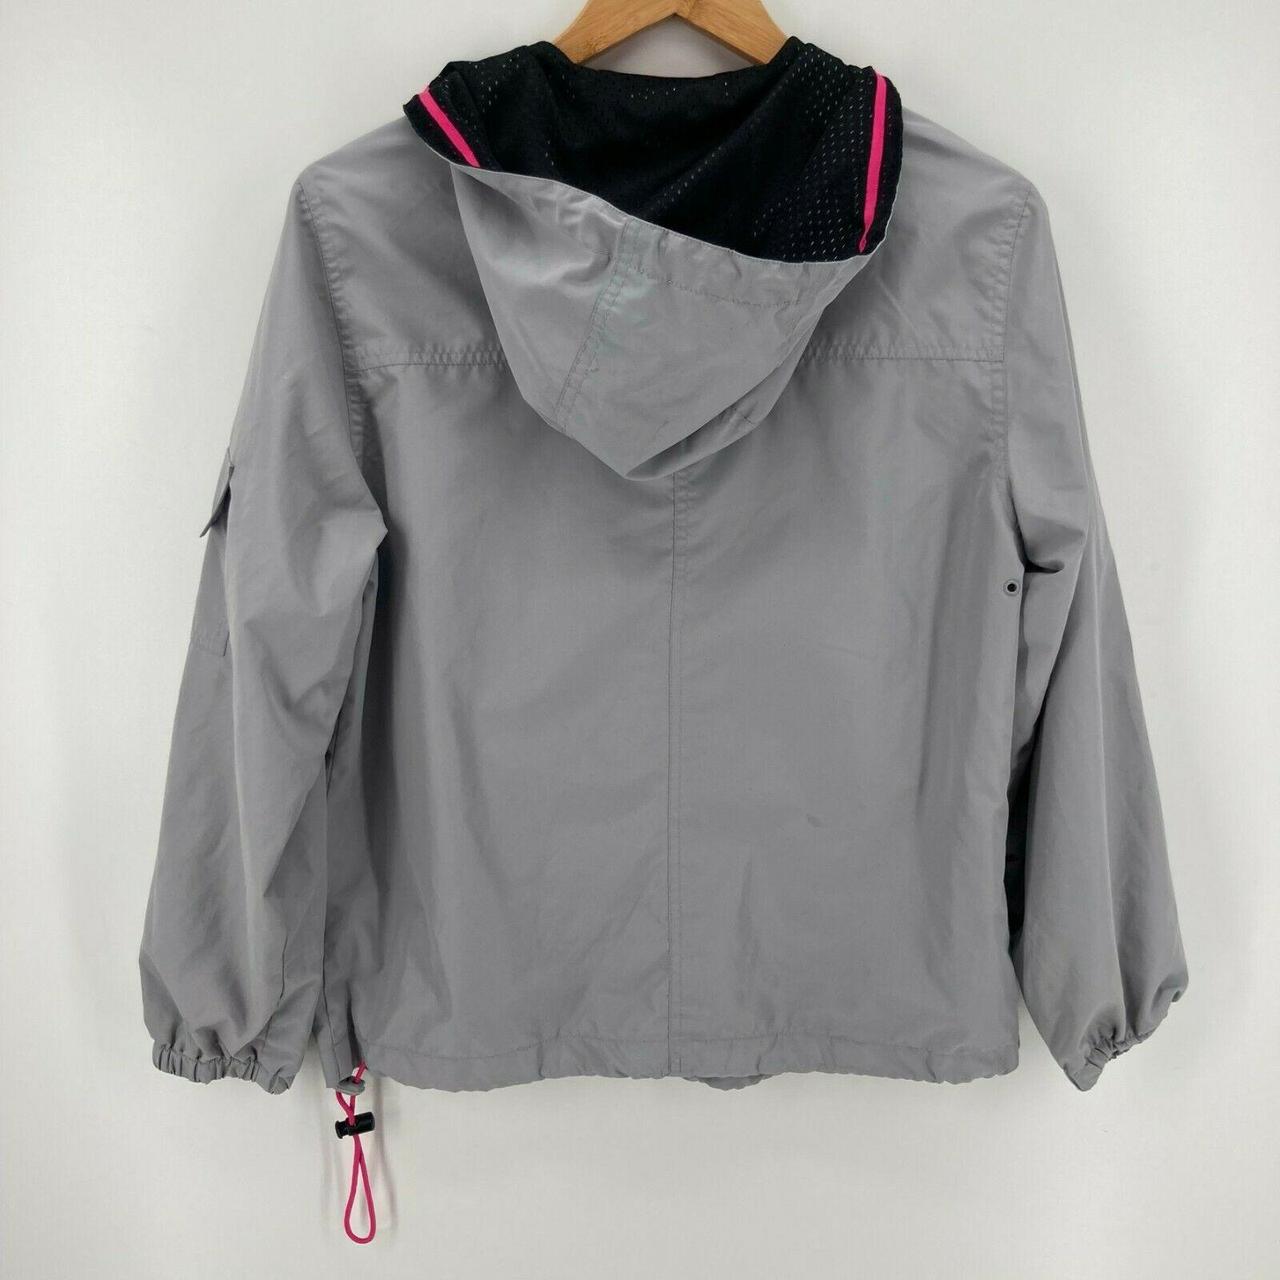 Product Image 3 - Guess Jacket Women's S Gray